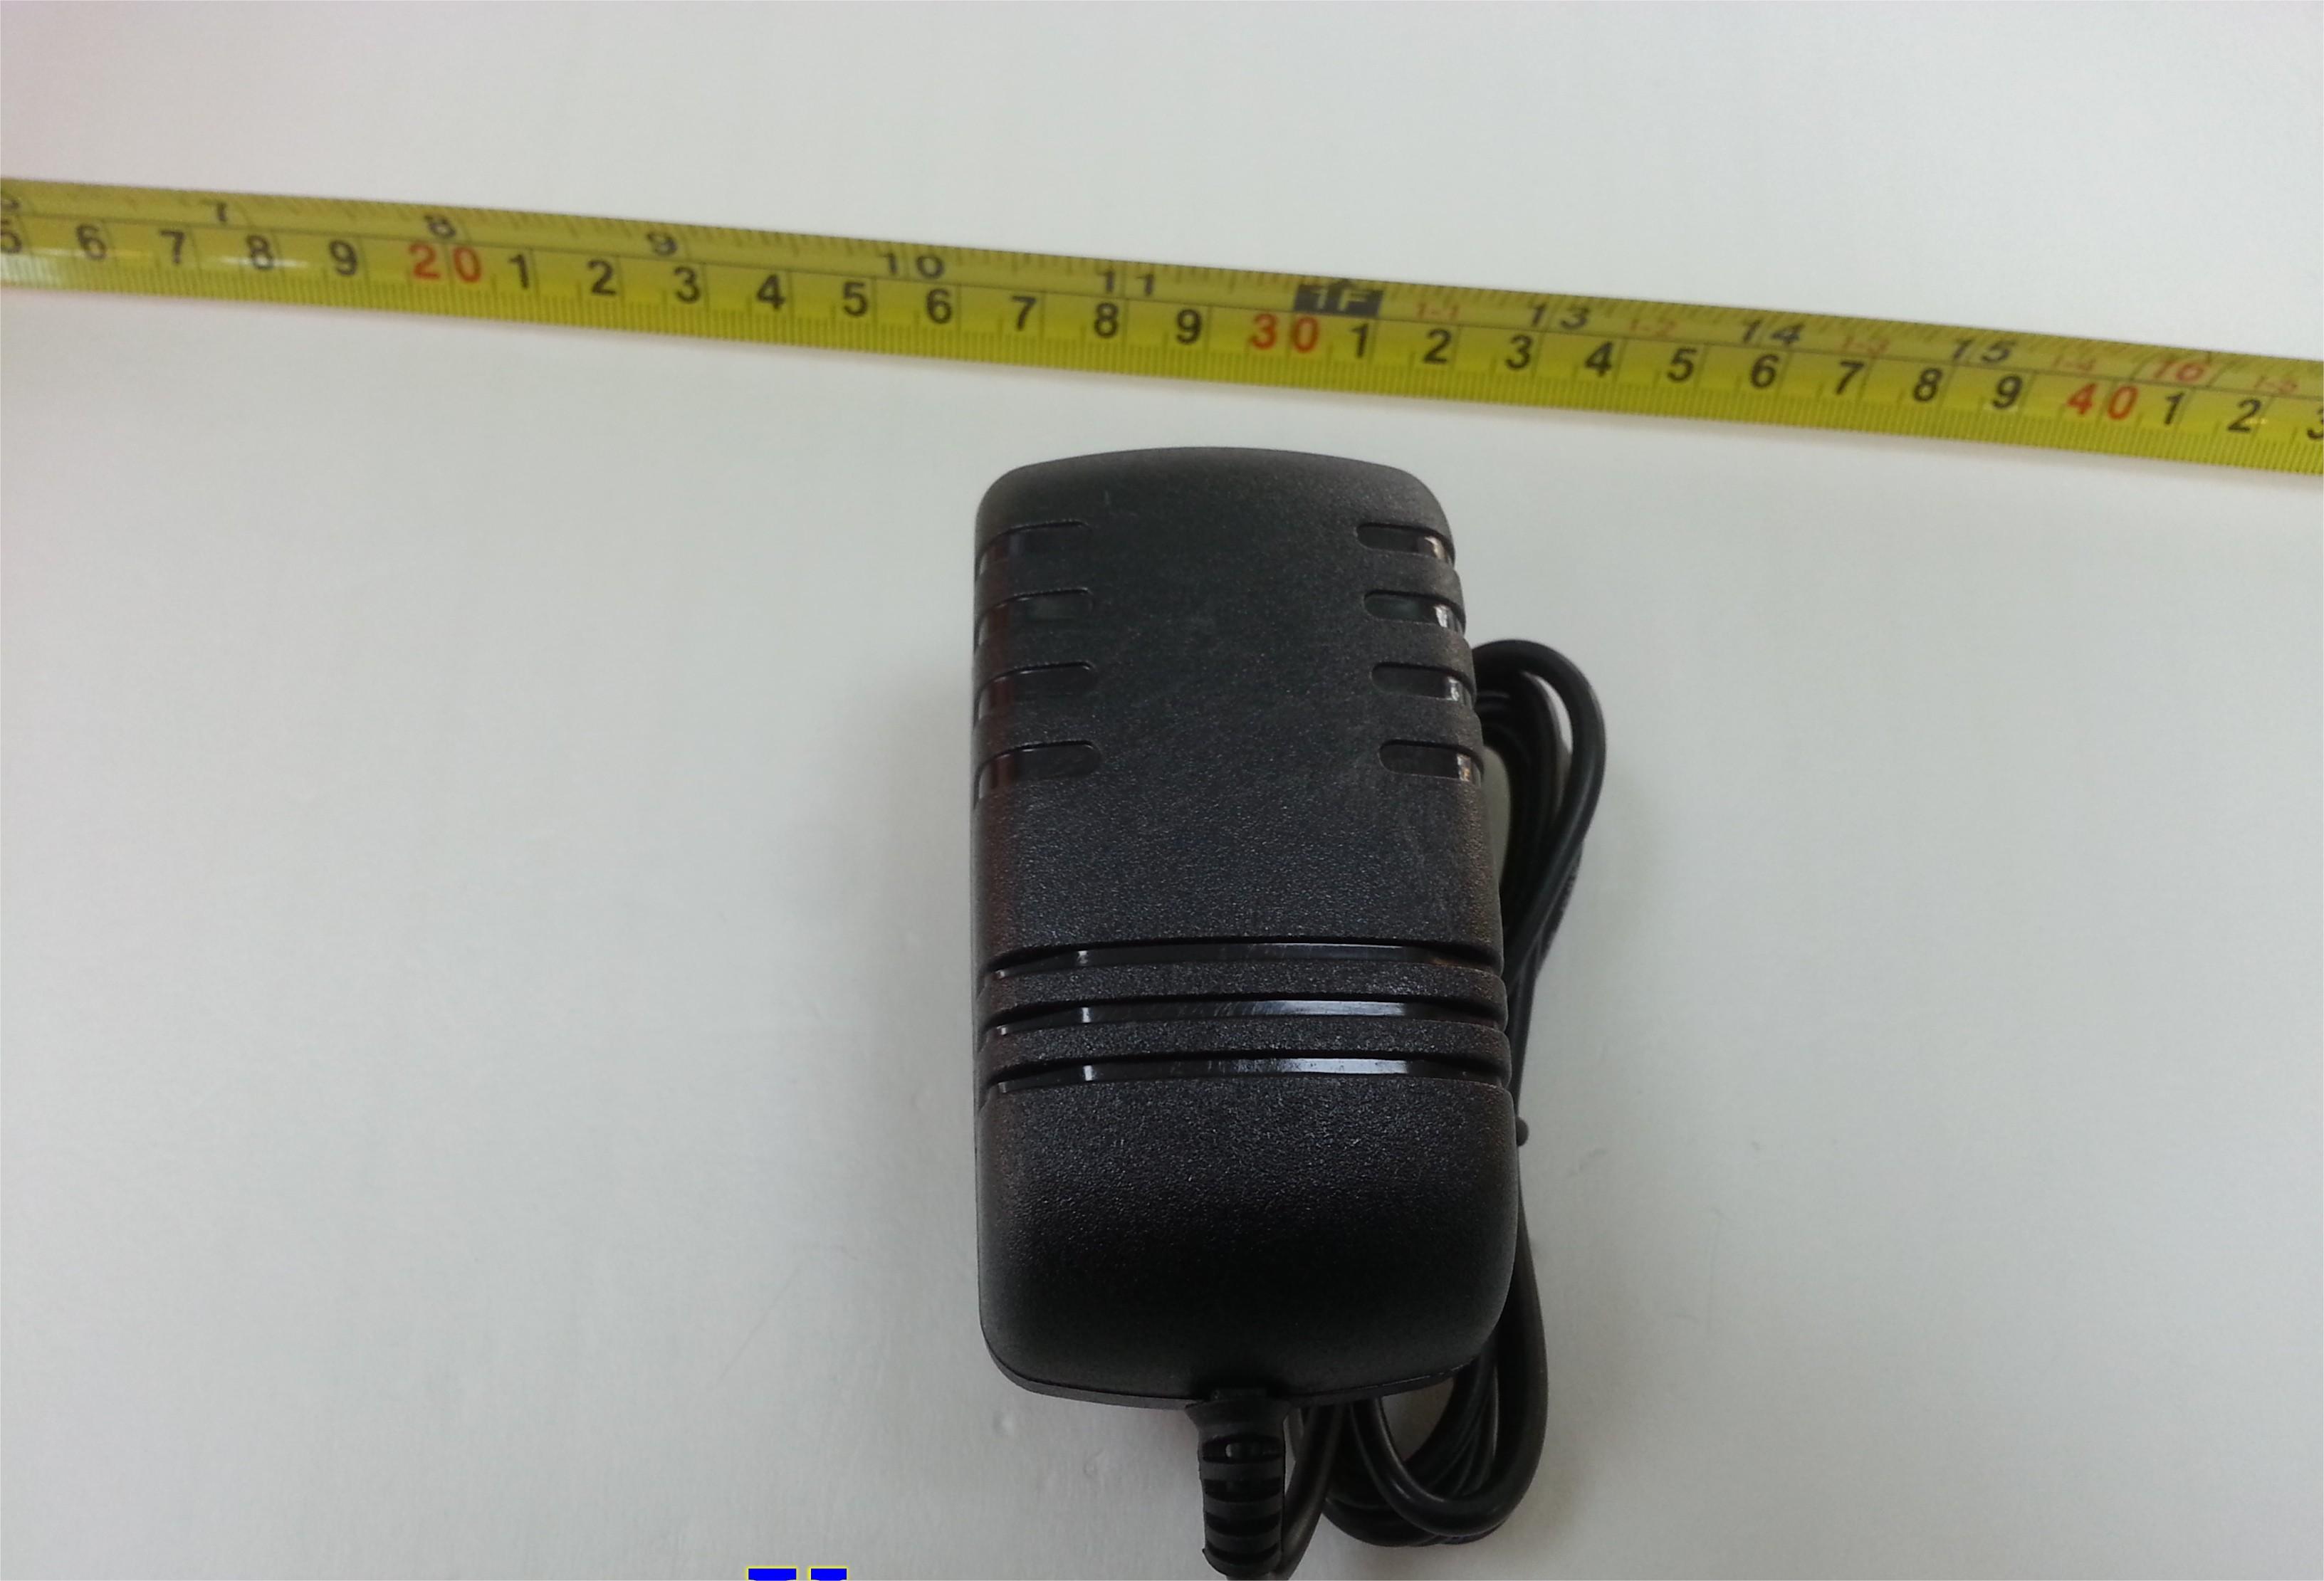 5V_15W_Power_Adapter_AC_to_DC_5V_3A_Power_led_Drivers